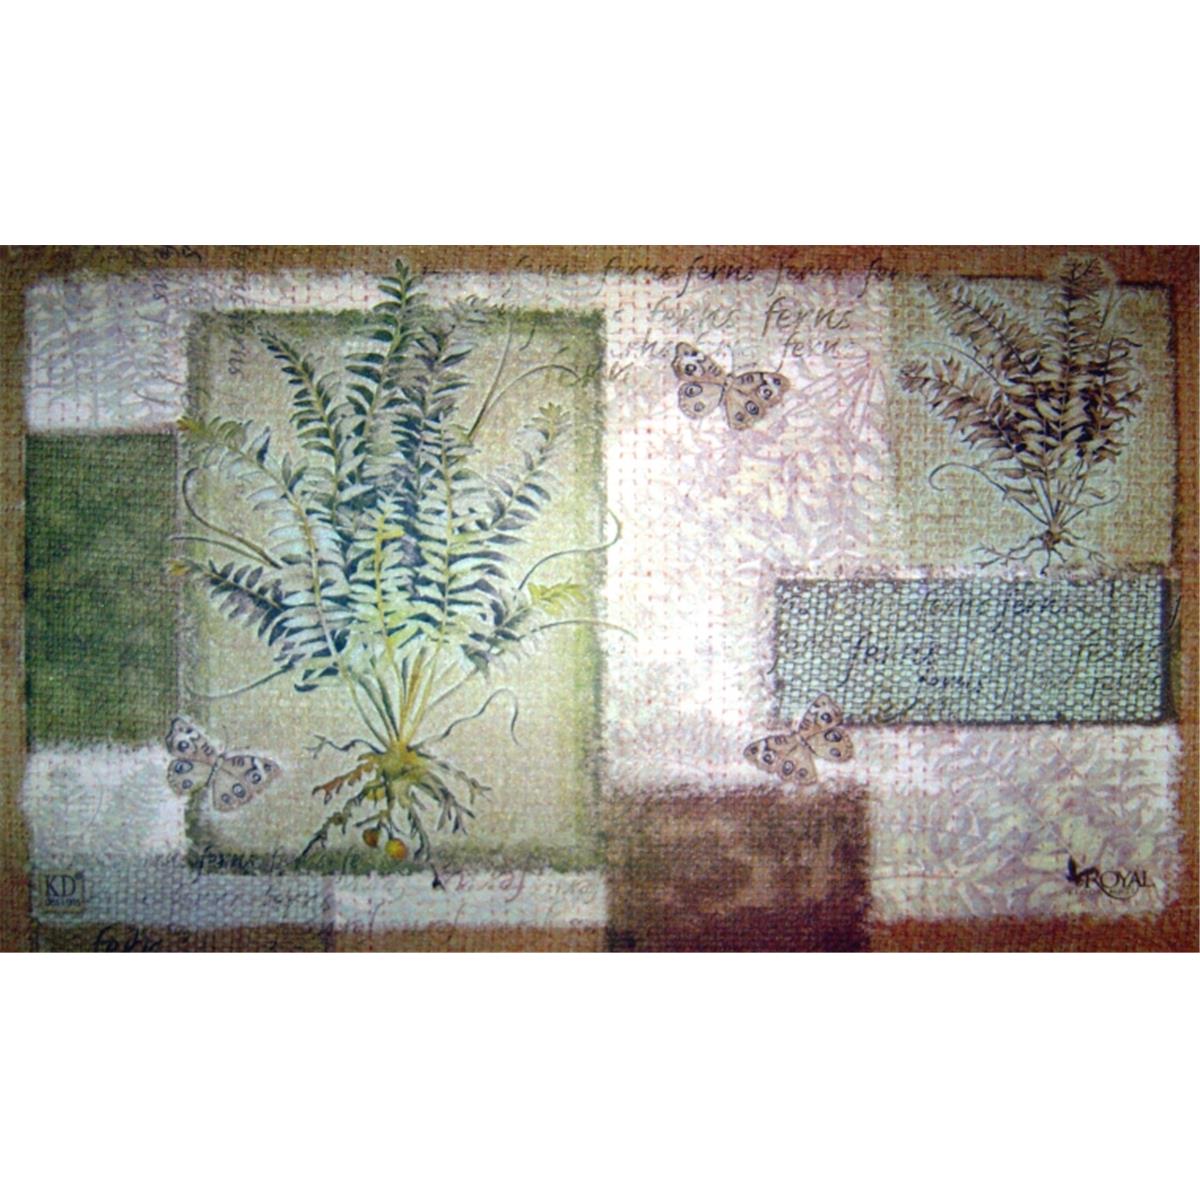 Awv071 Majestic Ferns Doormat Rug, Brown - 18 X 30 In.